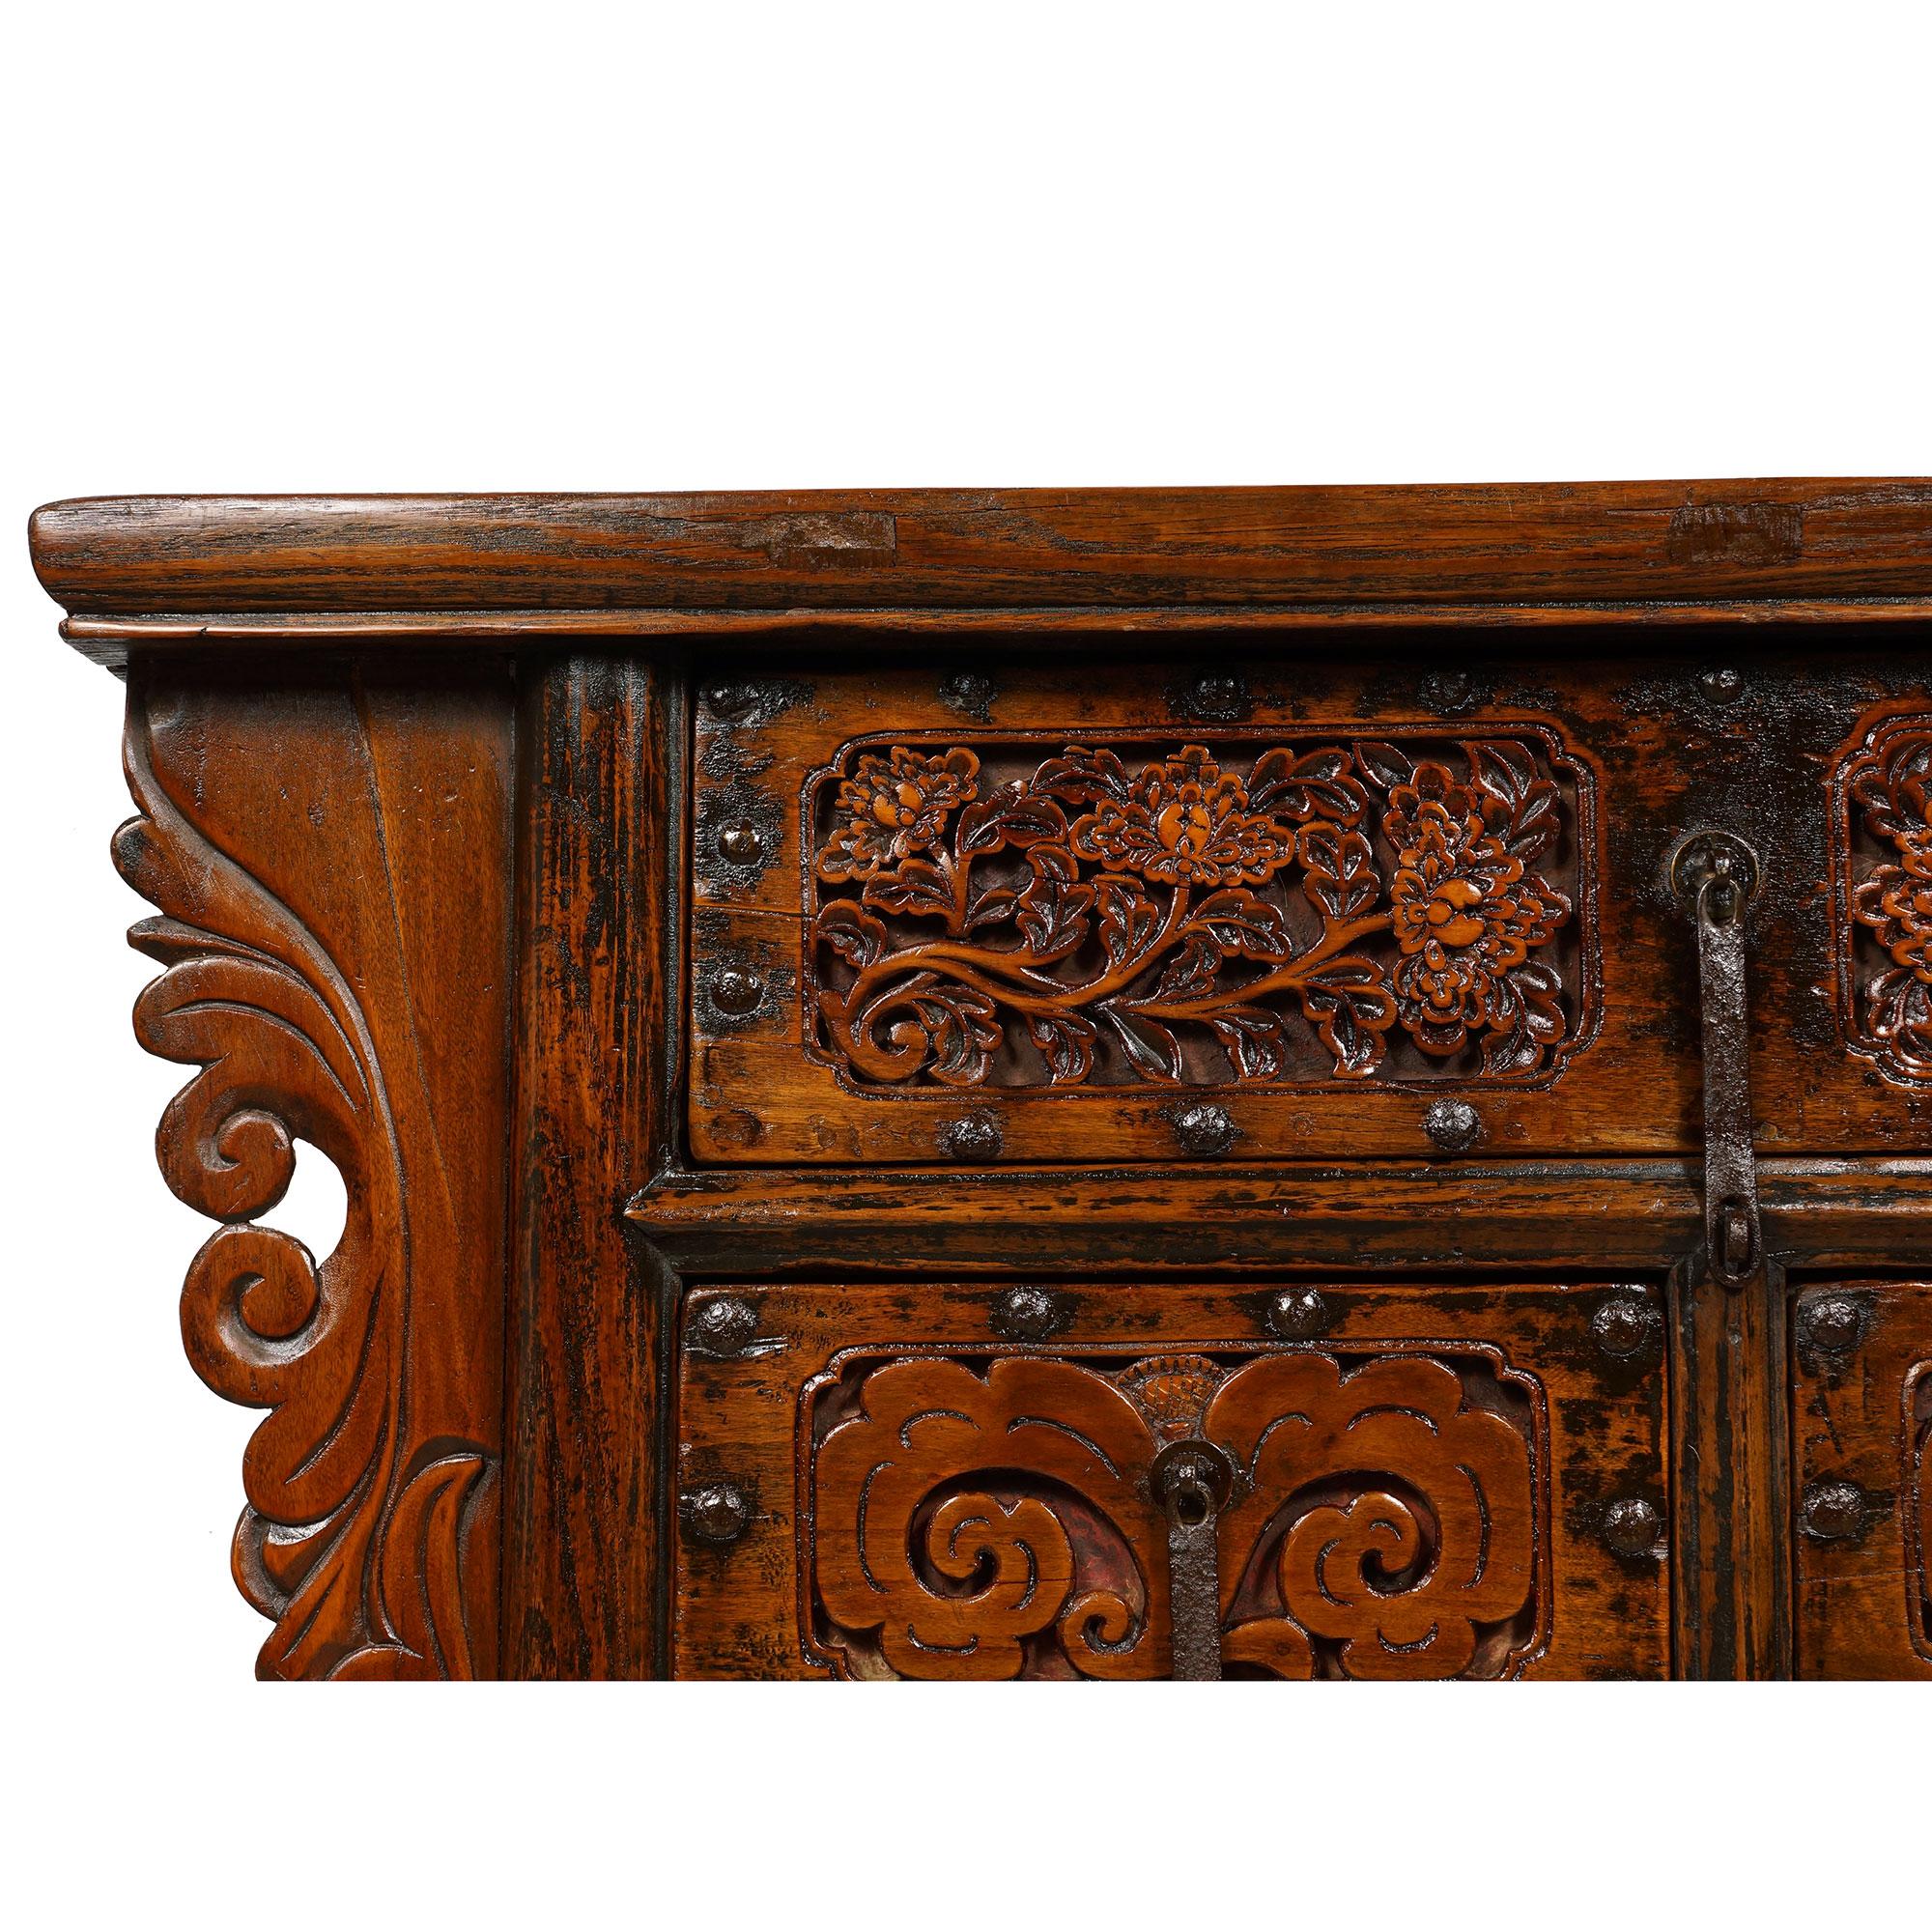 Hand-Carved 19th Century Antique Chinese Massive Carved Shan xi Console Table/Sideboard For Sale